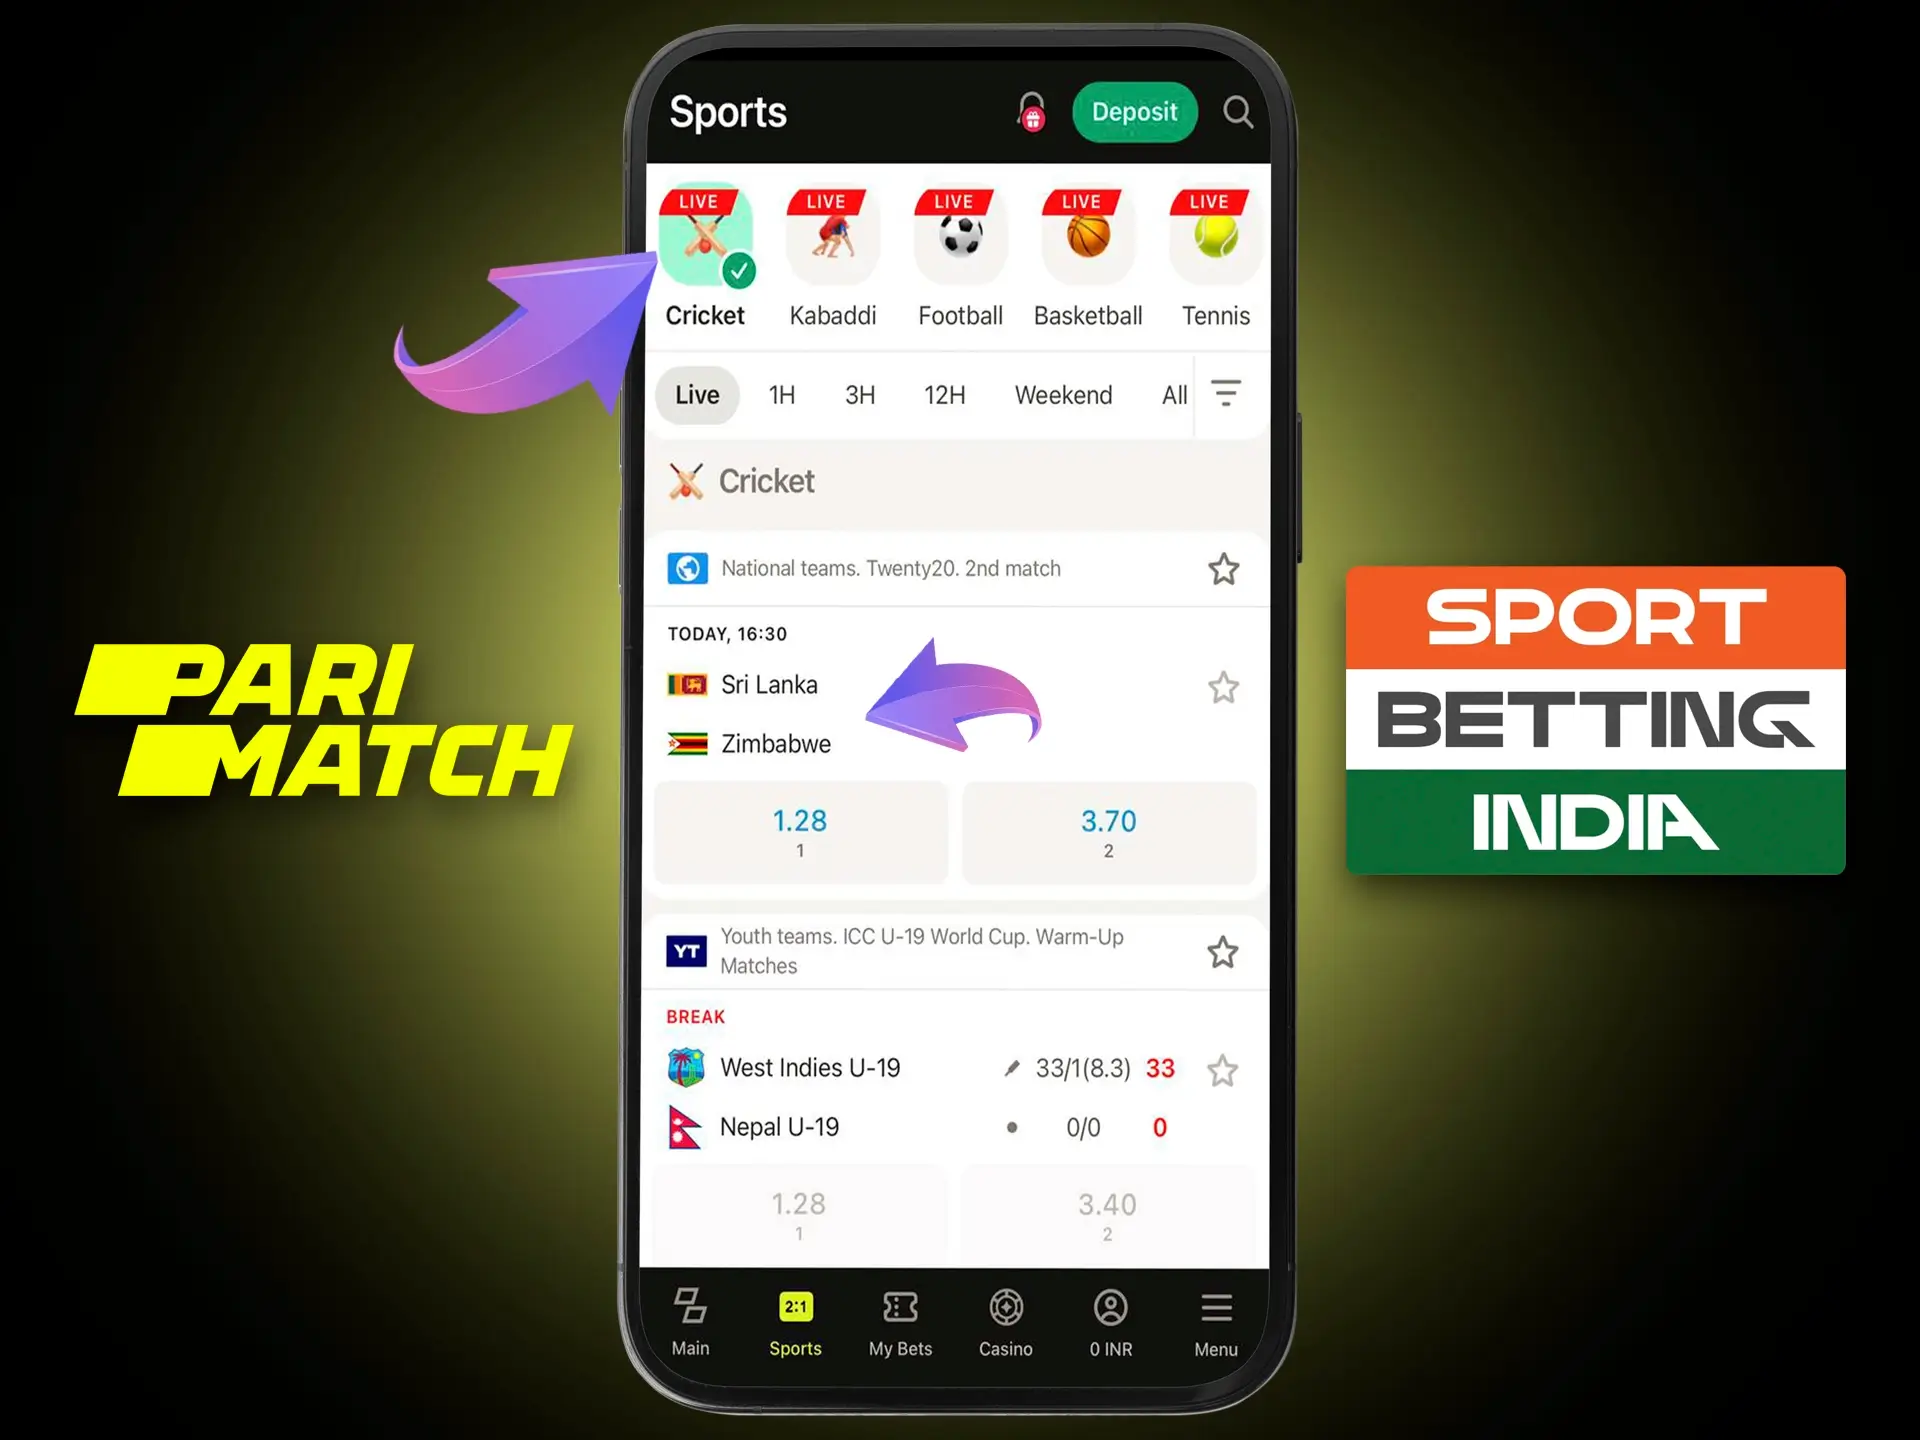 Select a match on the Parimatch website in which your favourite team will be playing.